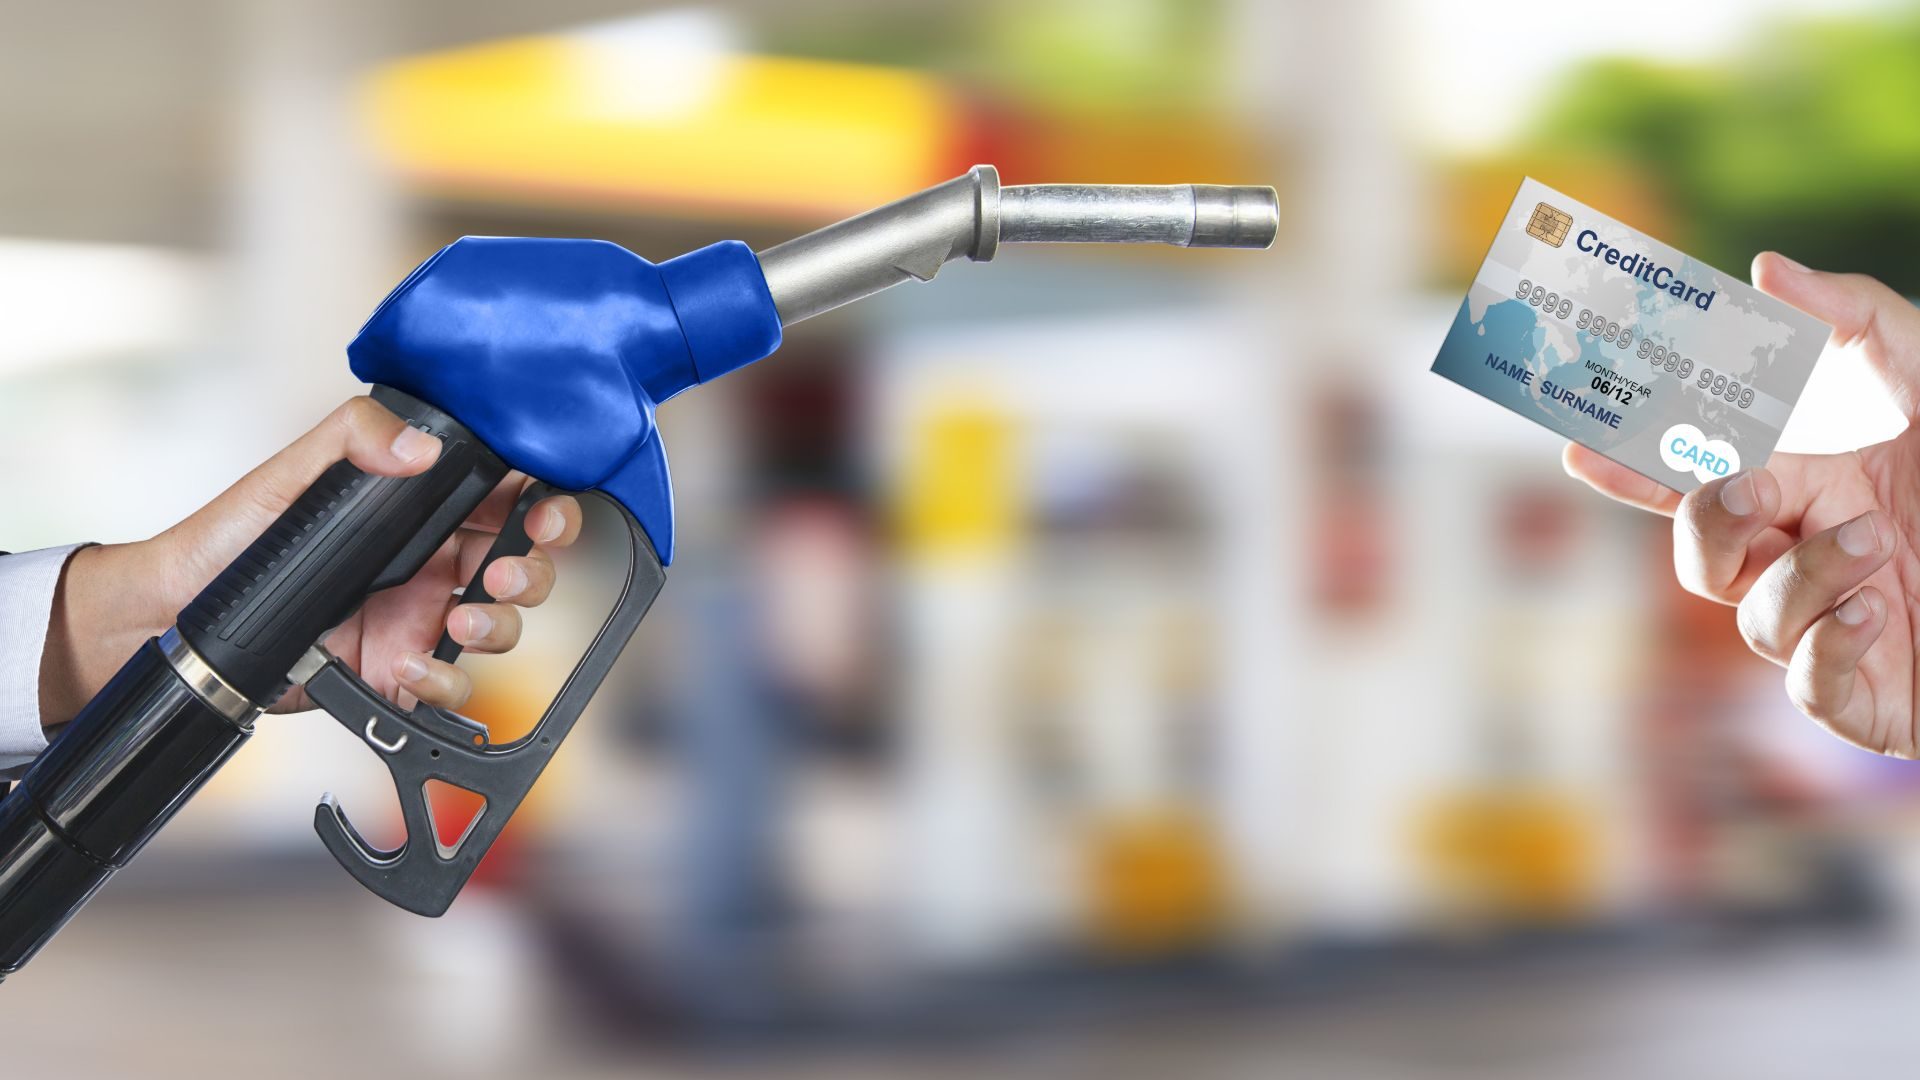 August 2021 Fuel Prices